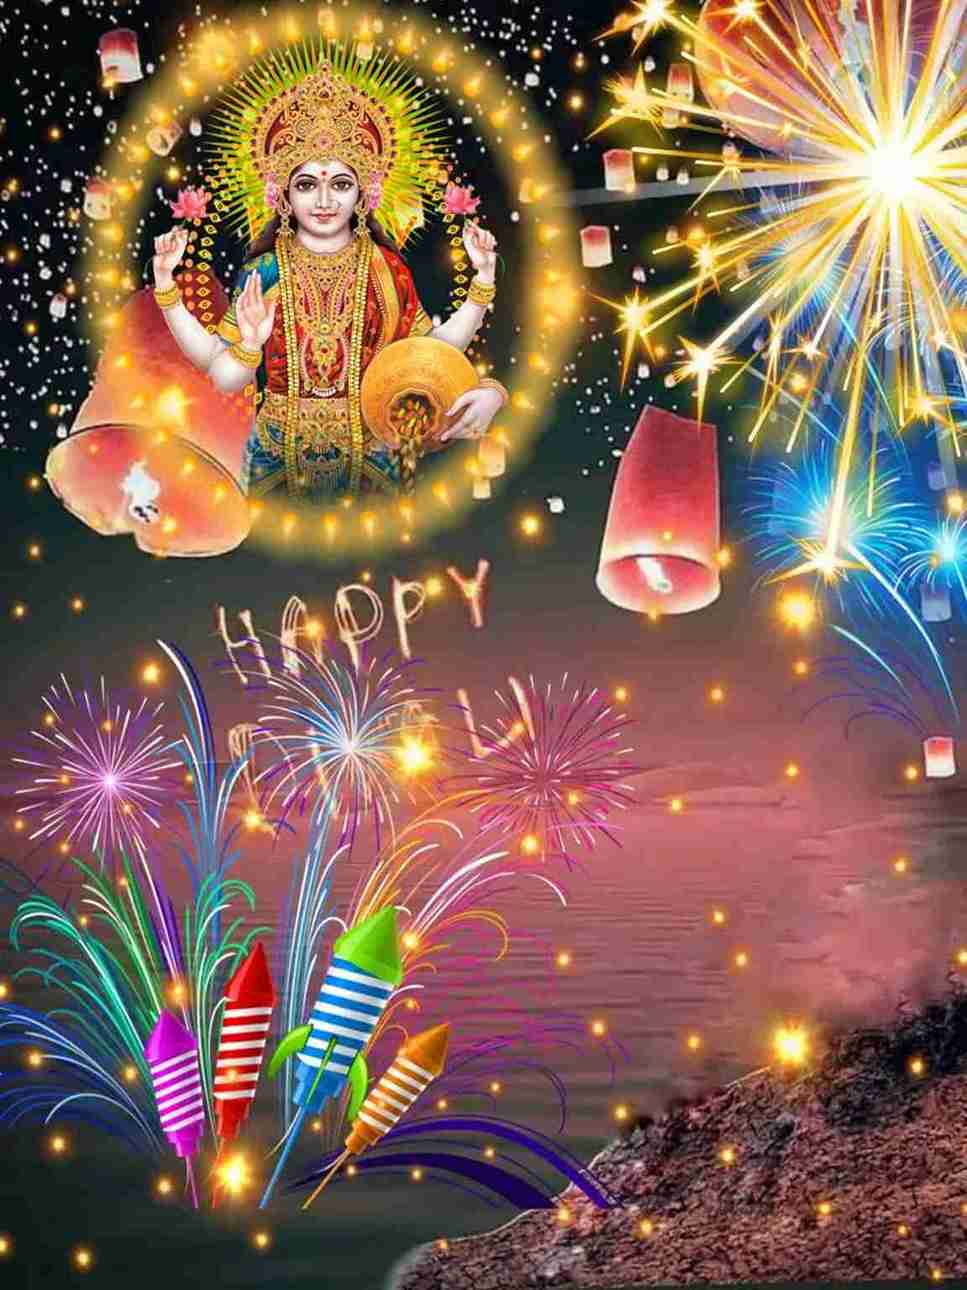 Diwali background images for editing